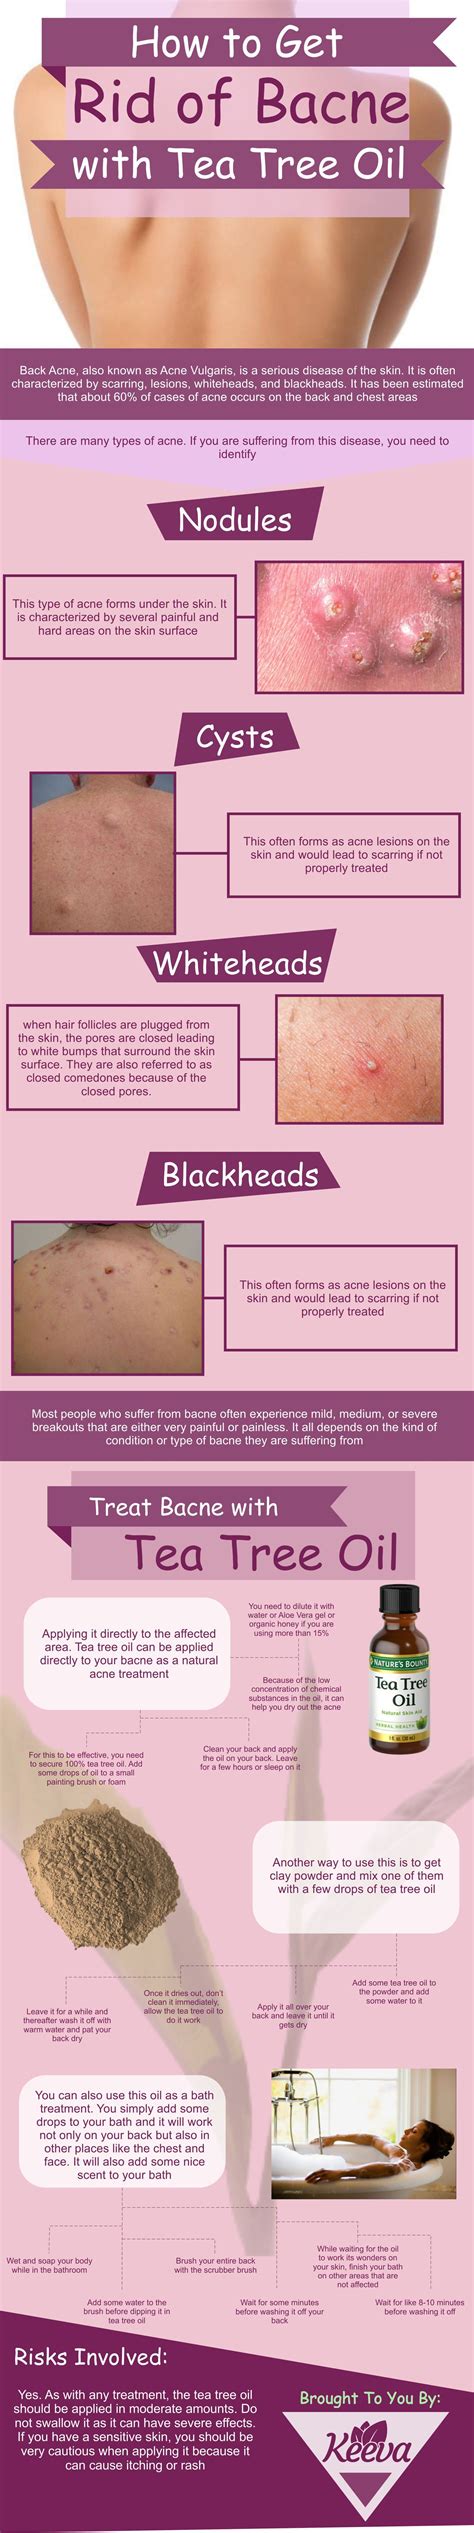 How To Get Rid Of Bacne Back Acne With Tea Tree Oil Serum Tree Oil